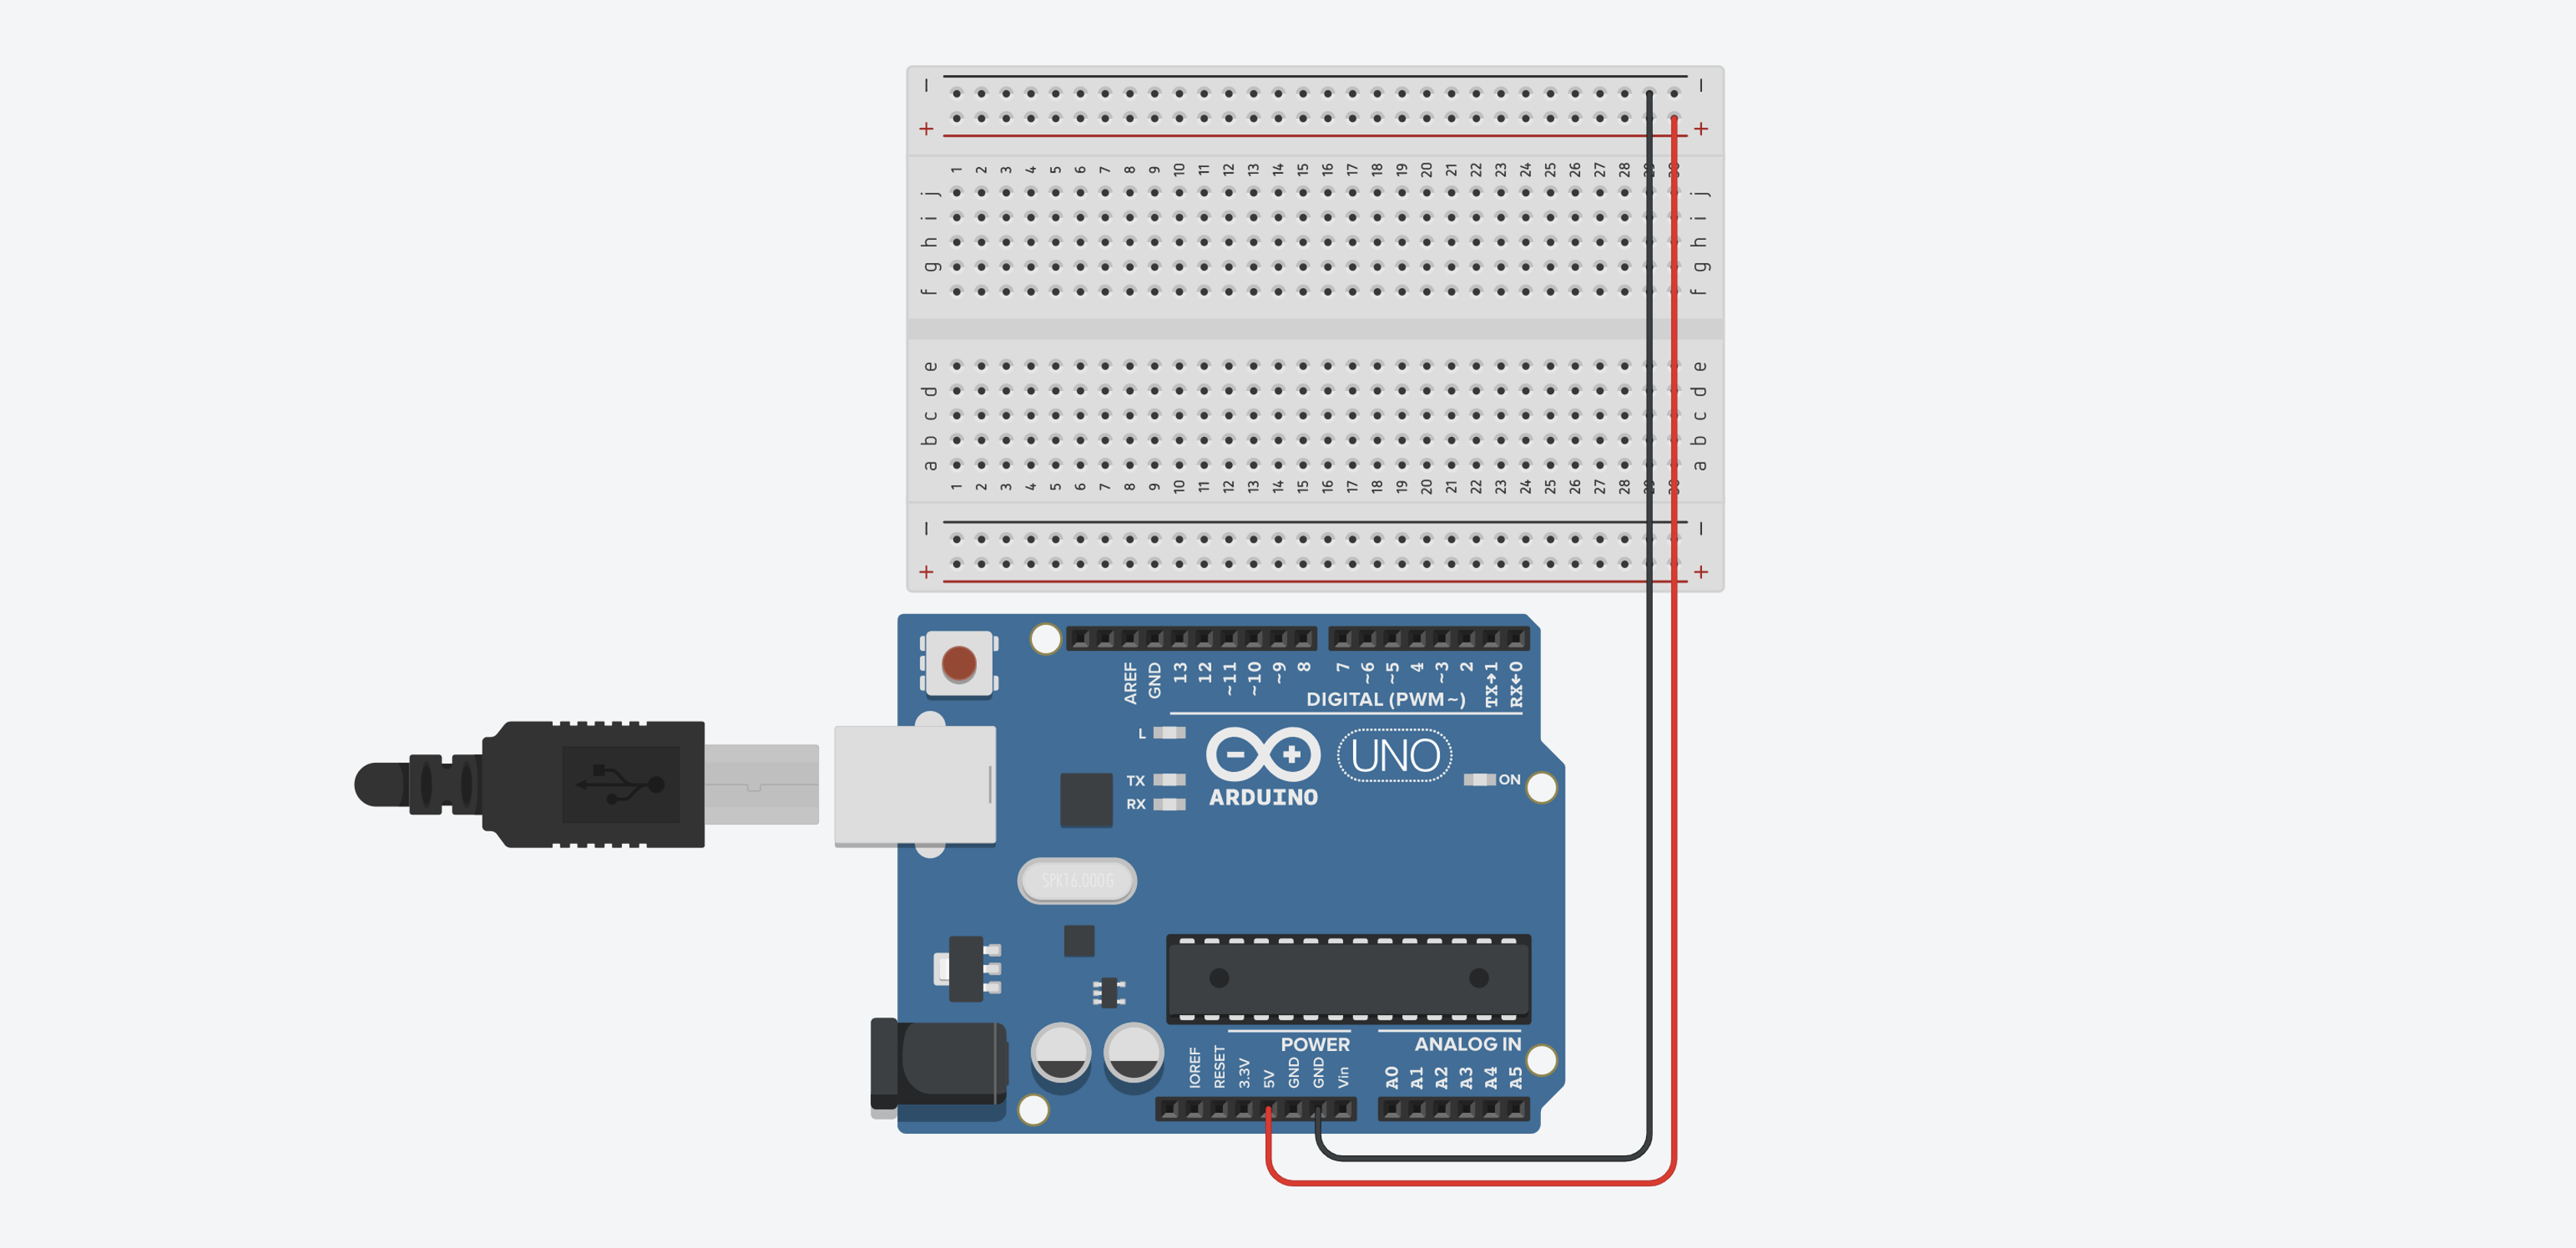 Diagram showing breadboard power and ground rails connected to the 5V and GND ports of the Arduino Uno